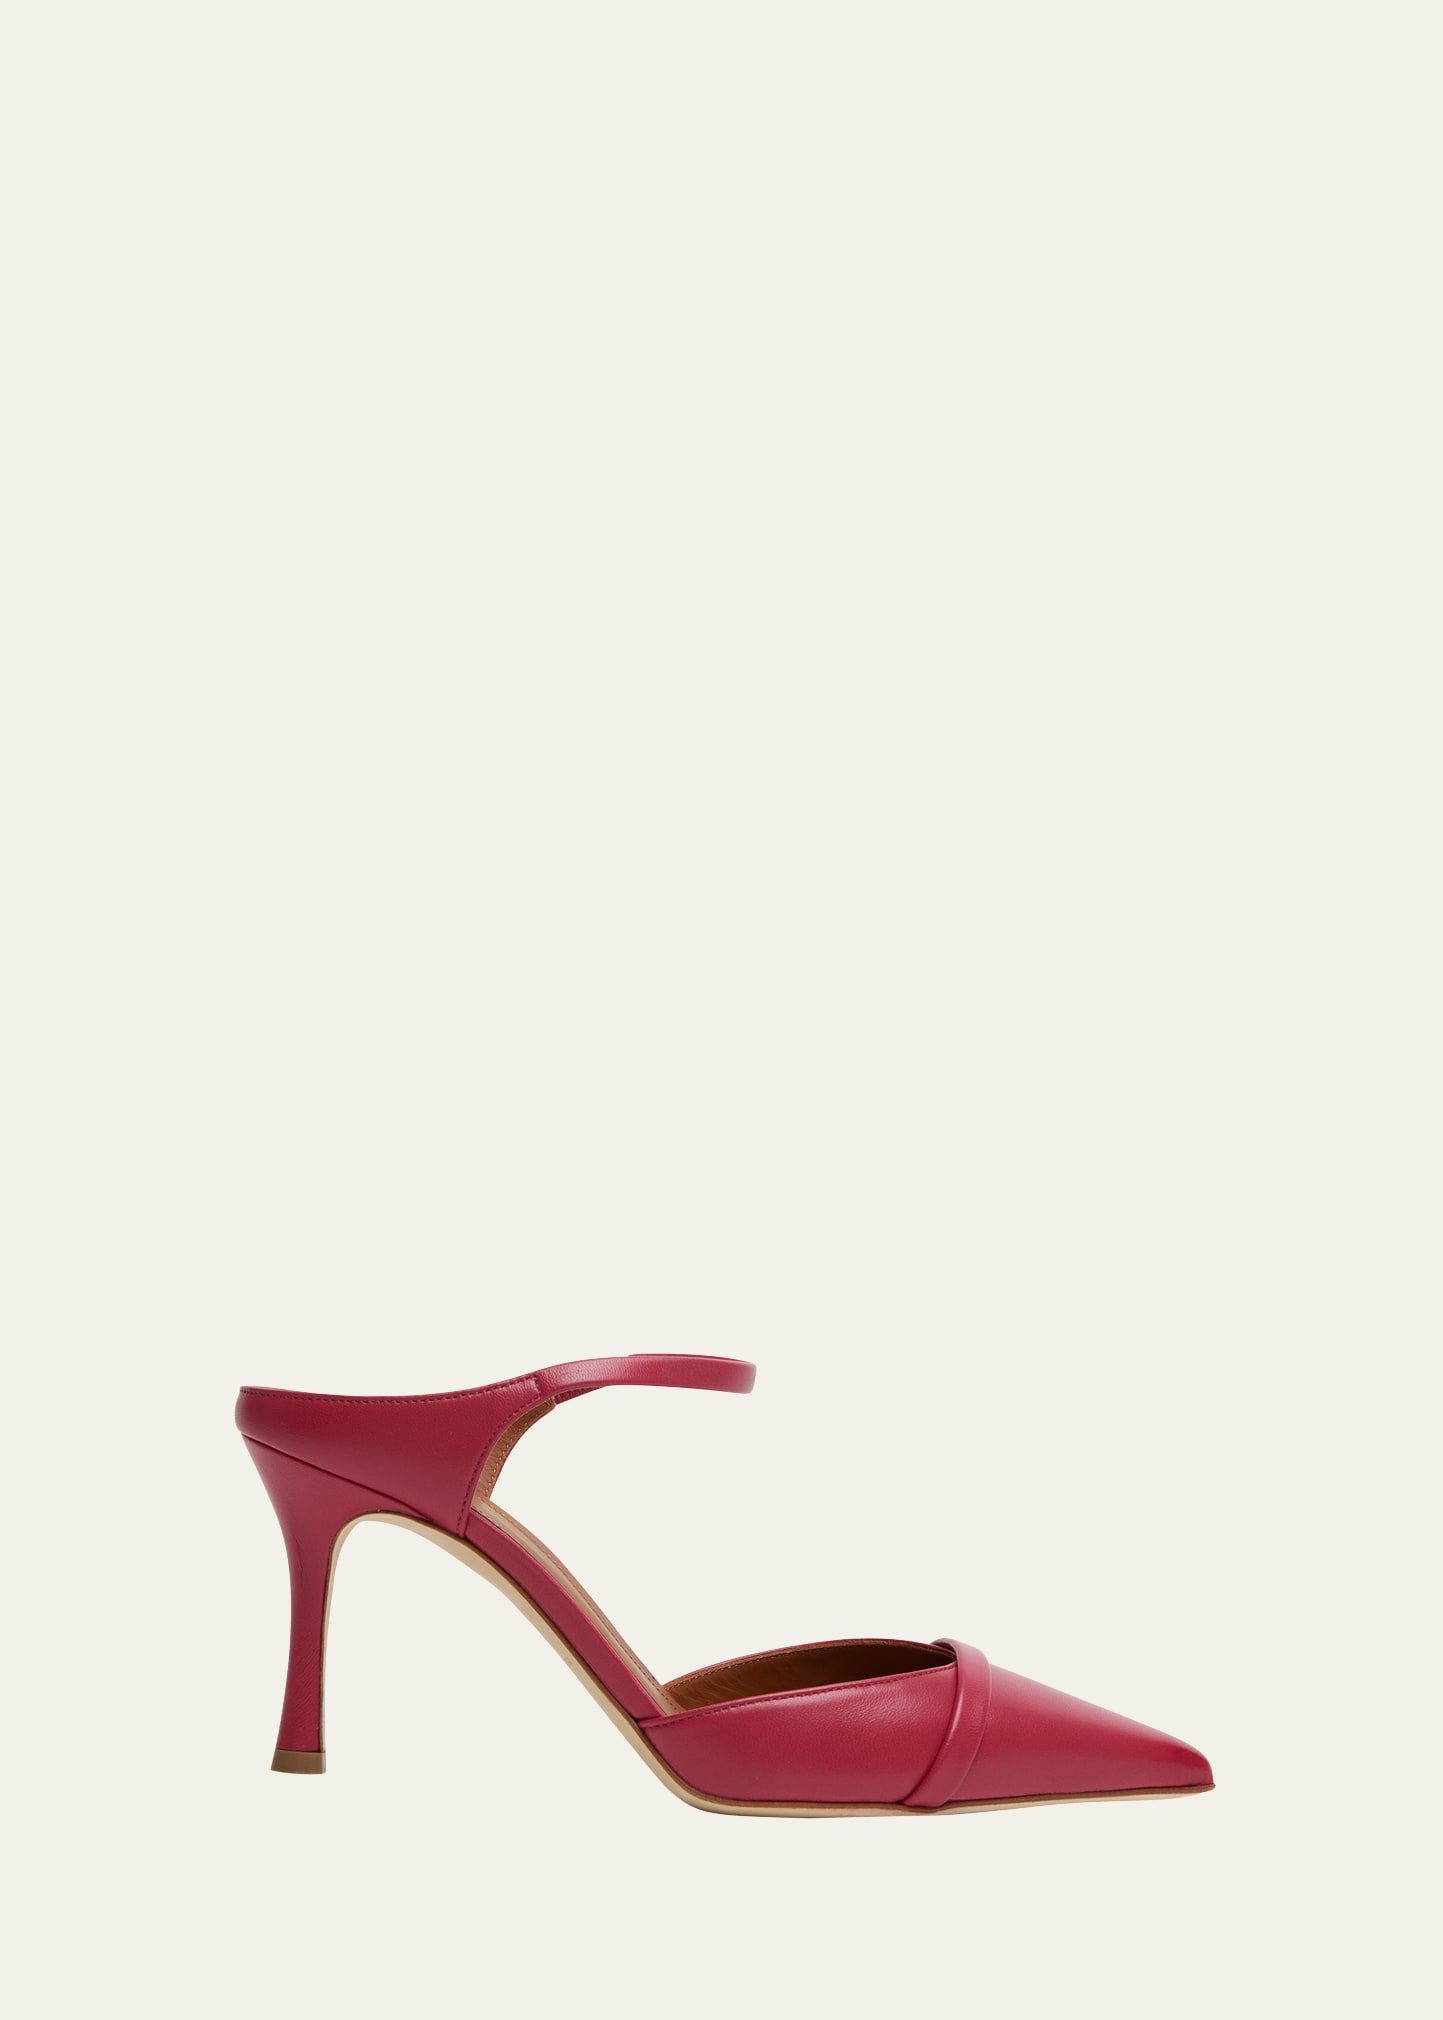 Malone Souliers Napa Leather Mule Pumps In Cherry